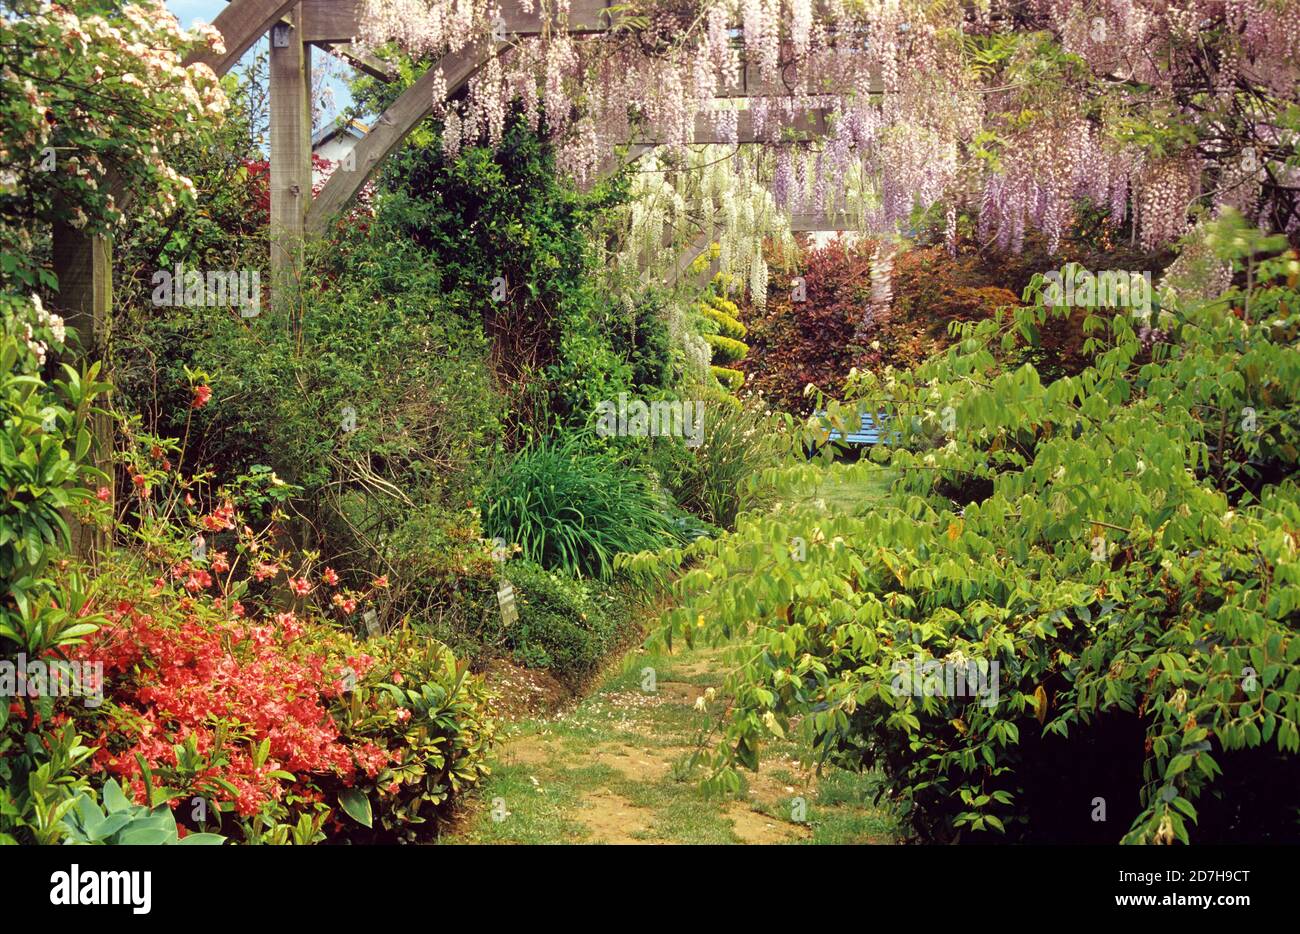 Damaged lawn walkway and climbing plant on pergola Glycine (Wisteria sp) in  spring Stock Photo - Alamy